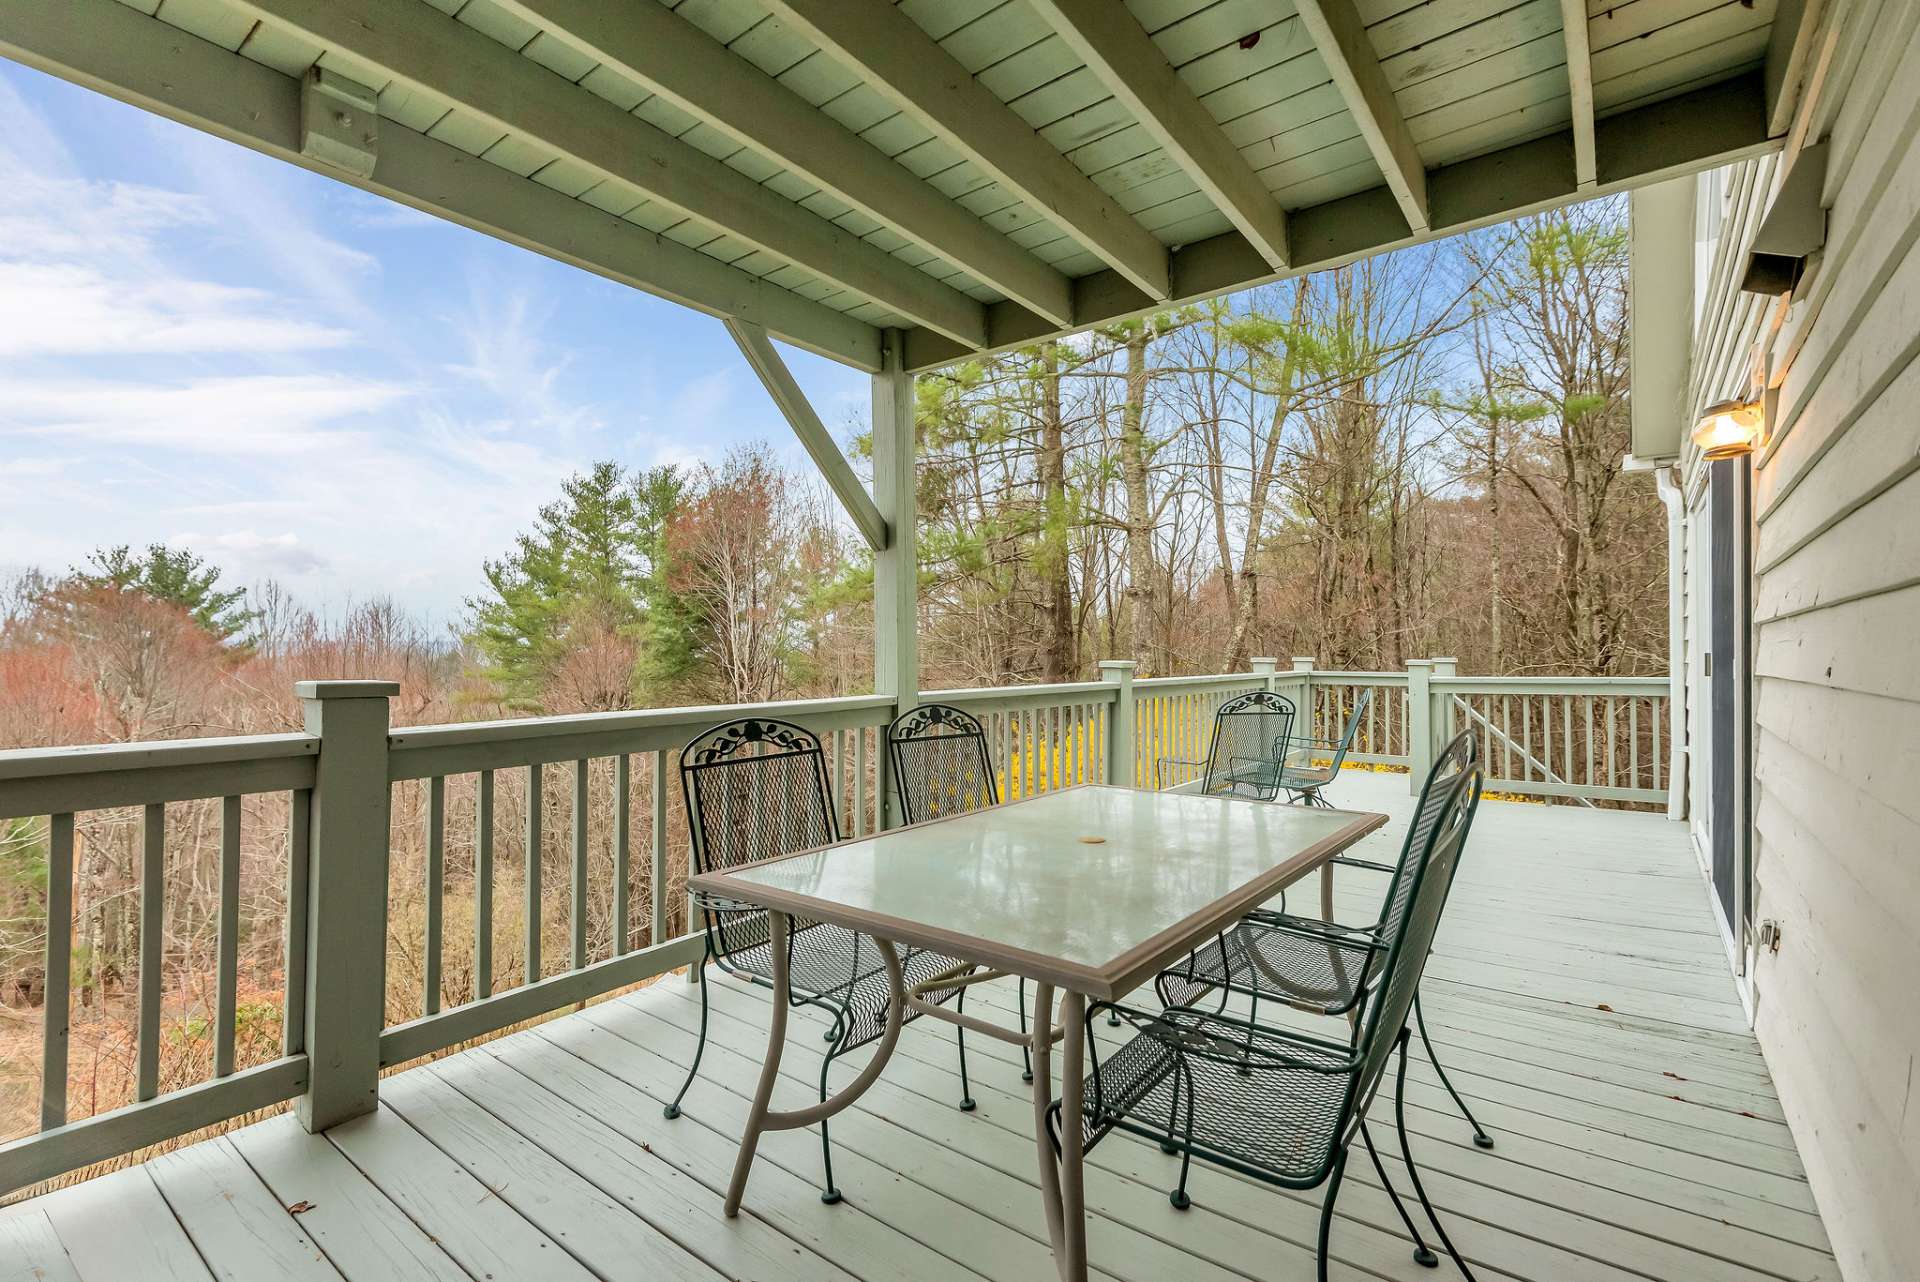 Main Level deck provides space for outdoor entertaining.